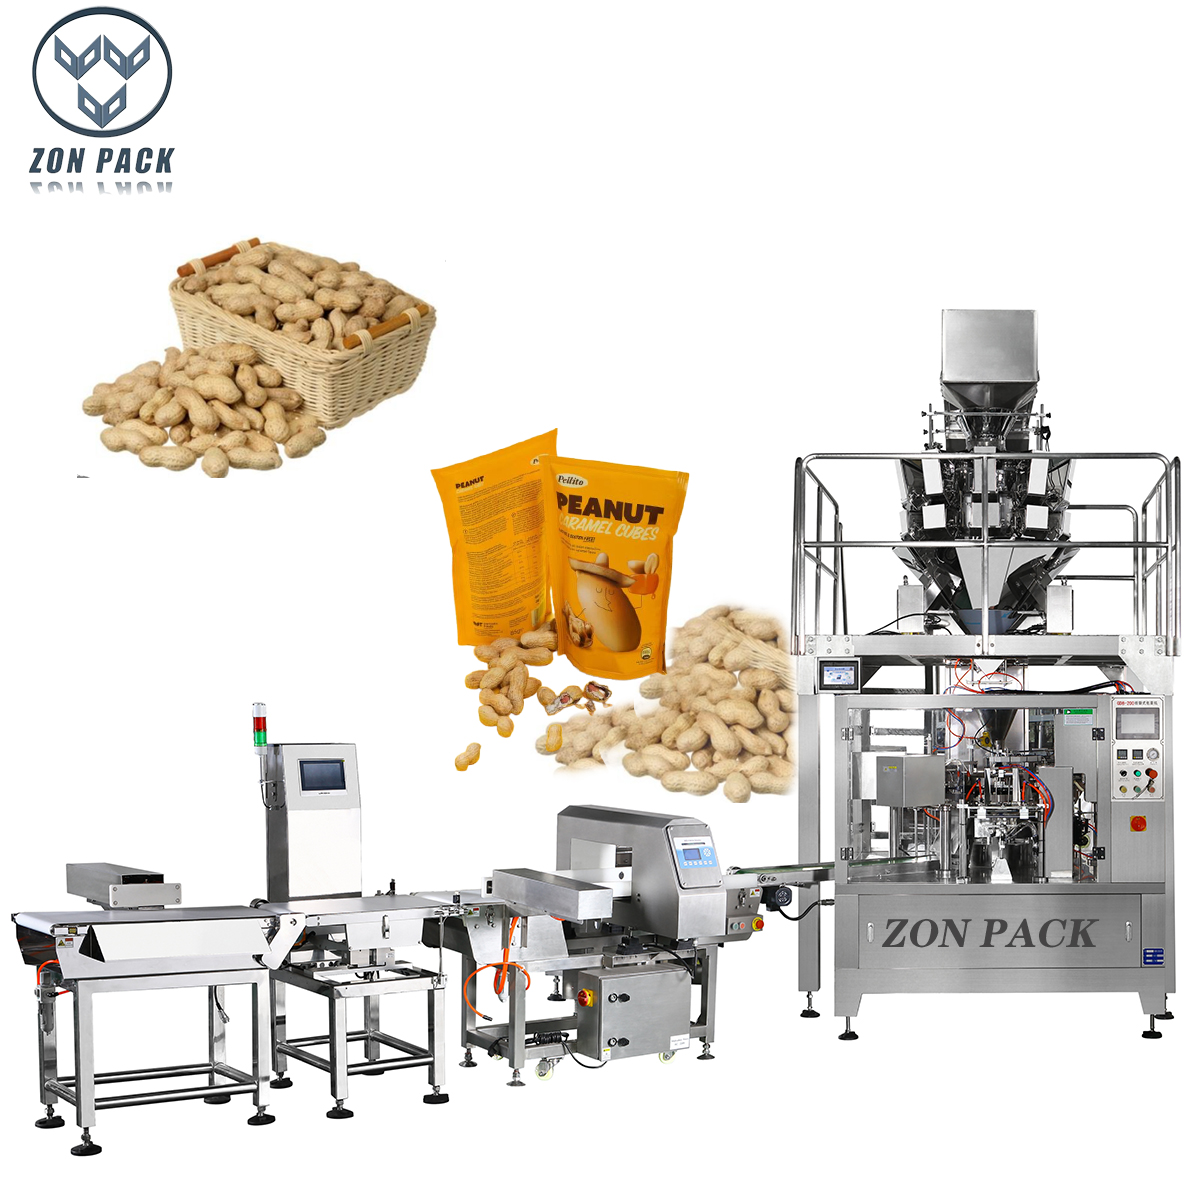 multihead weigher premade bag filling packing machine for sealing packaging food granules grains cashew nuts dried fruits peanuts